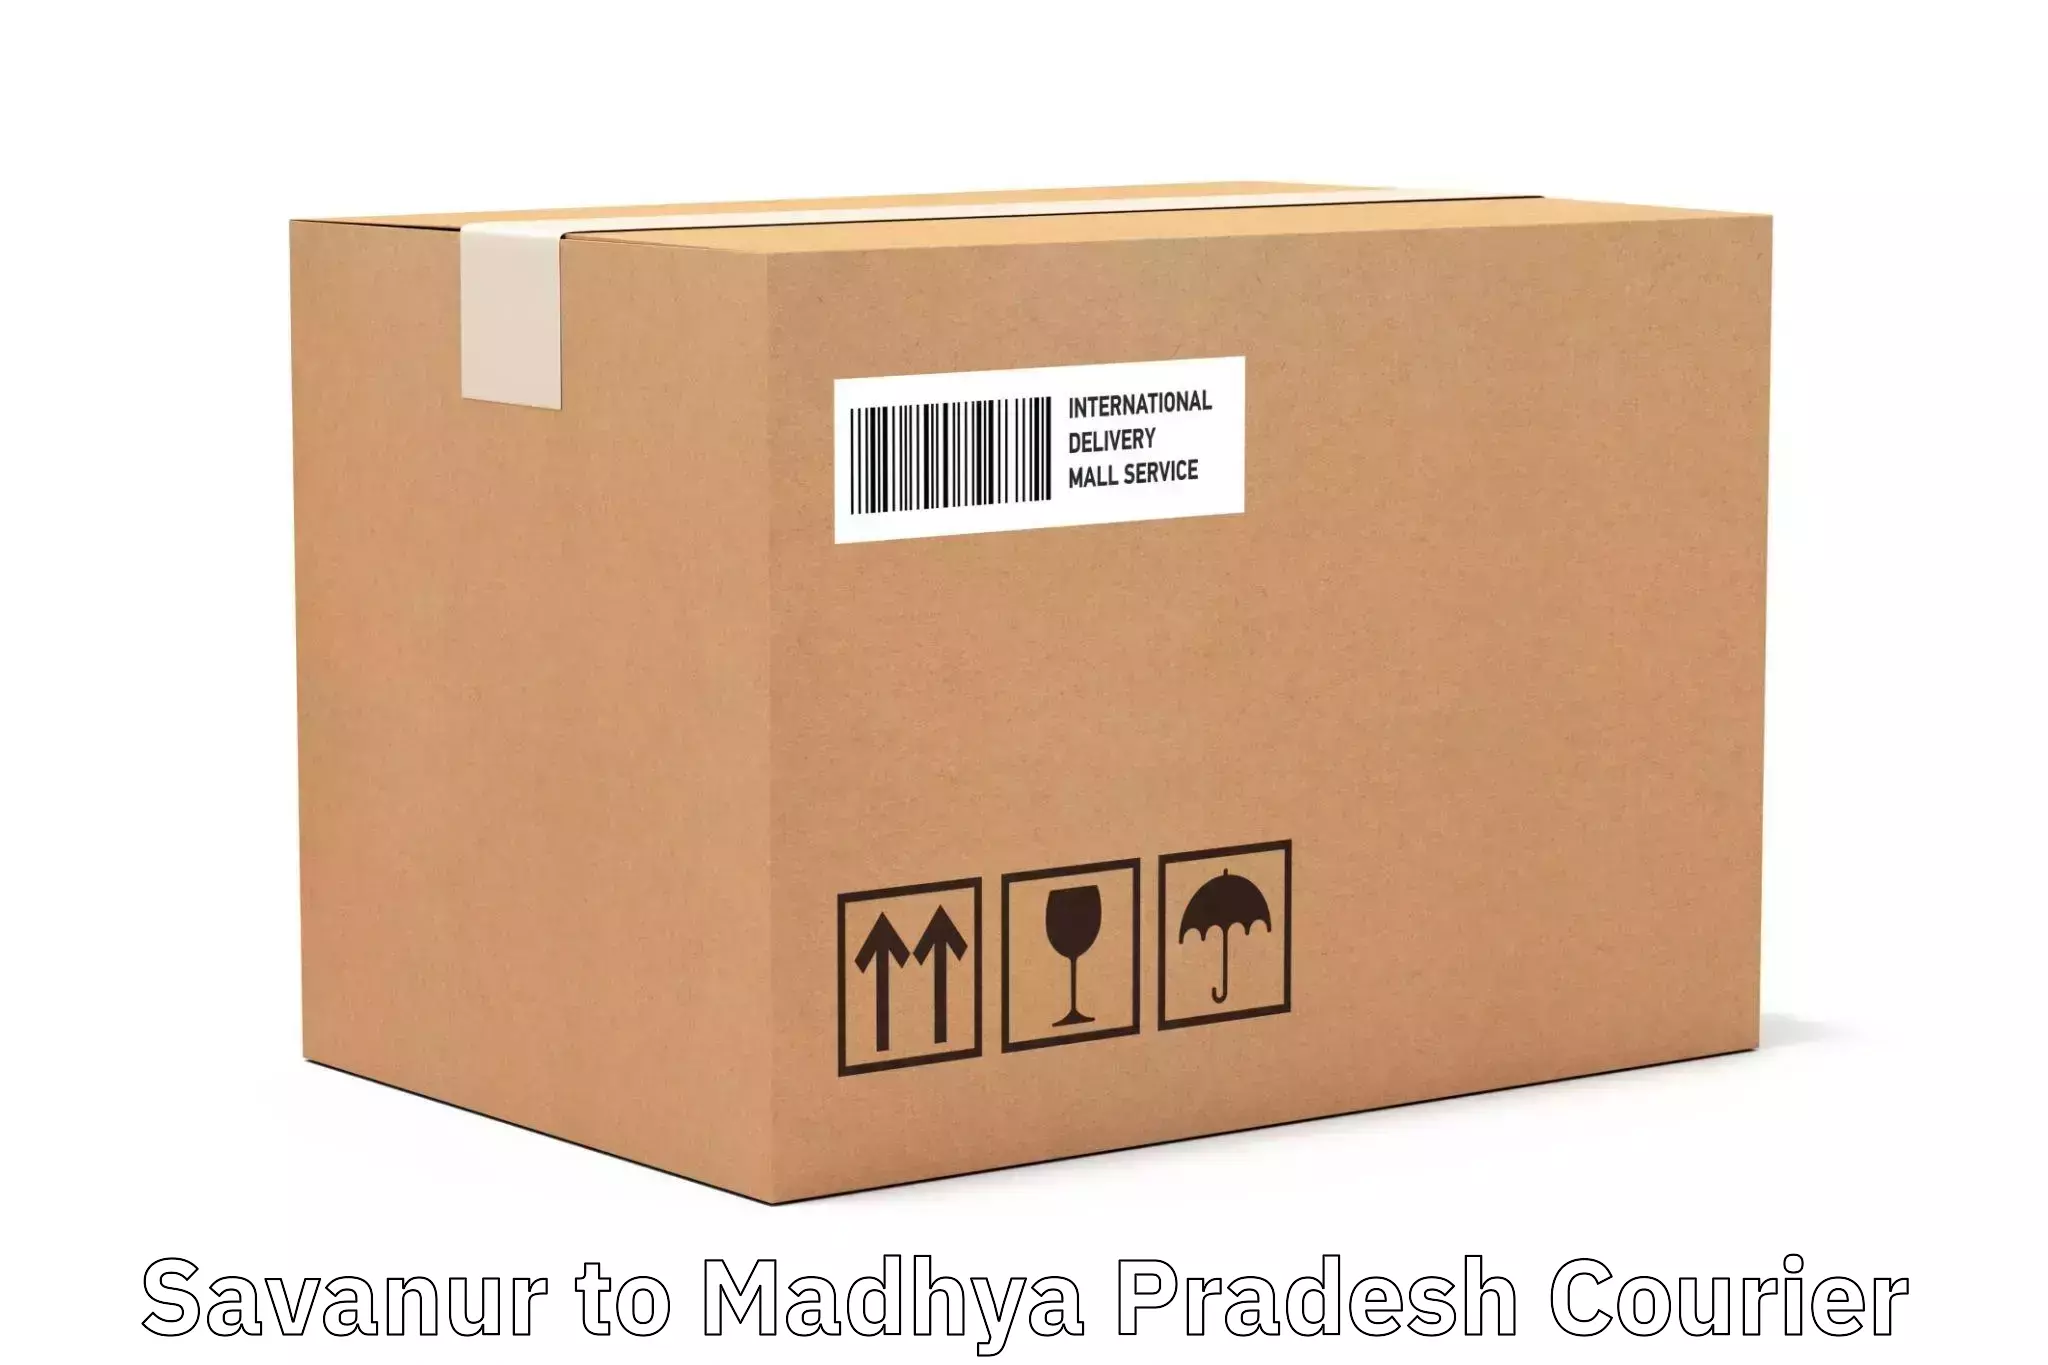 Expedited shipping solutions Savanur to Indore